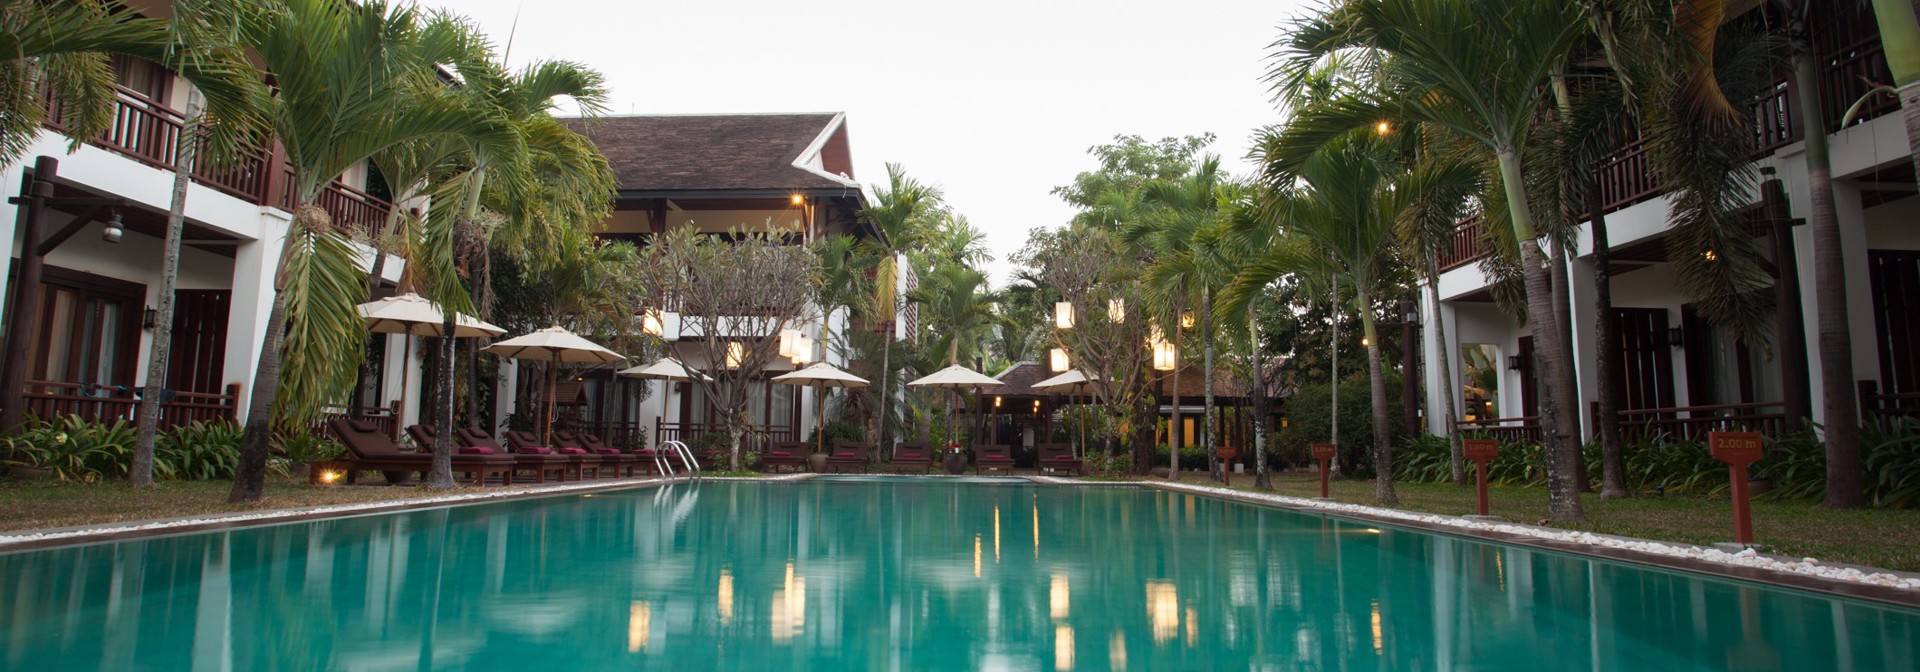 Greenpark Boutique Hotel Swimming Pool